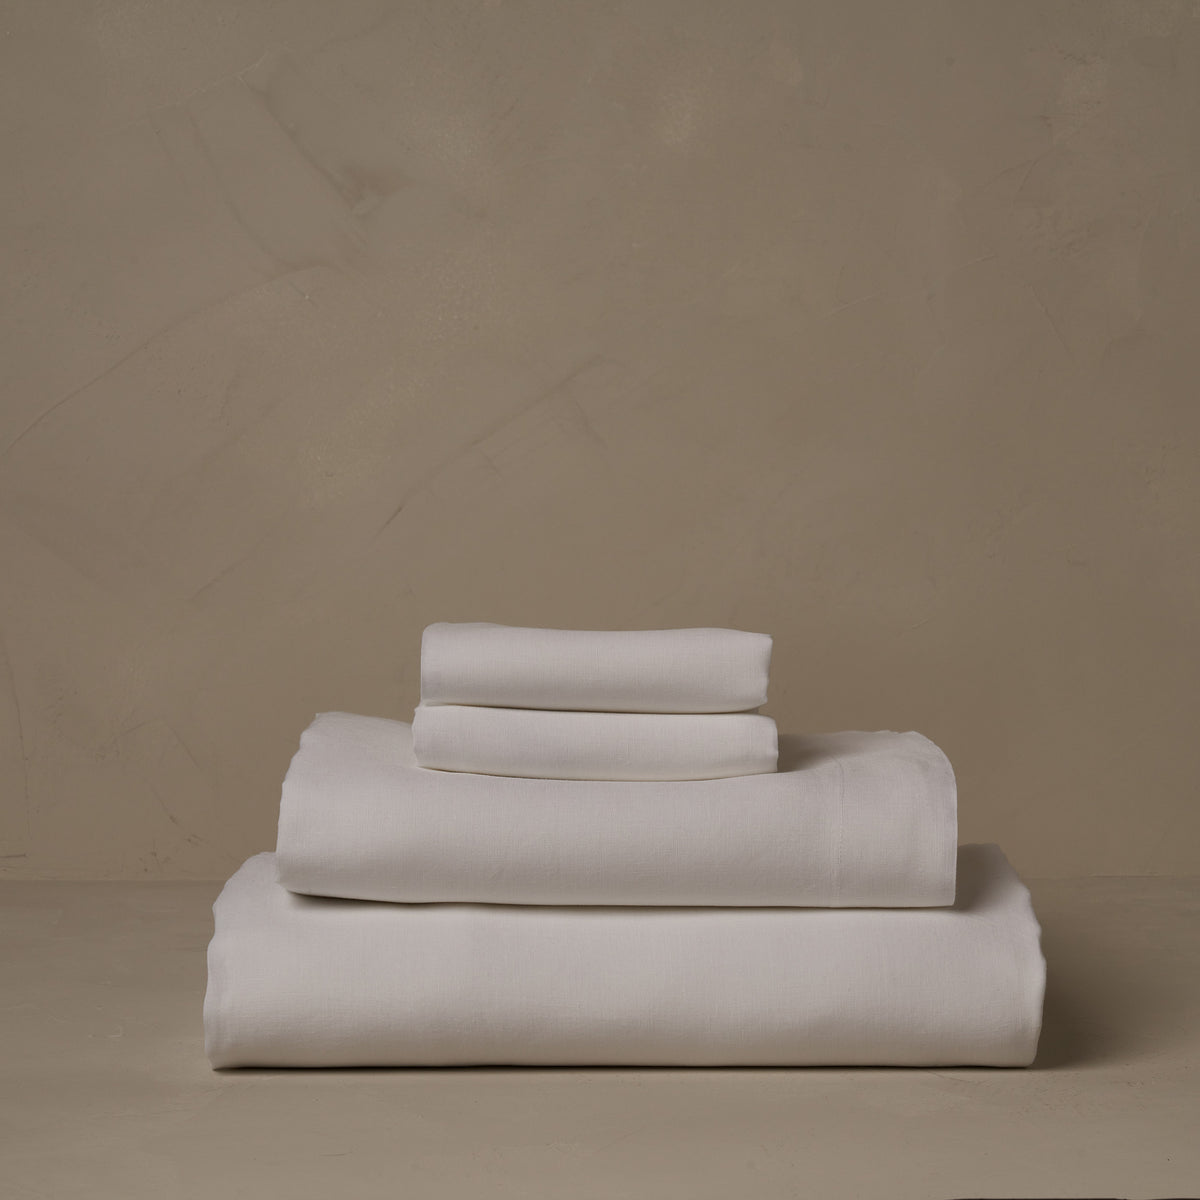 A stack of breathable and relaxed 100% linen LETTO Lino Primo sheets in white, made in Italy. The sheet set includes a fitted sheet, a flat sheet, and a pair of pillowcases. data-image-id=